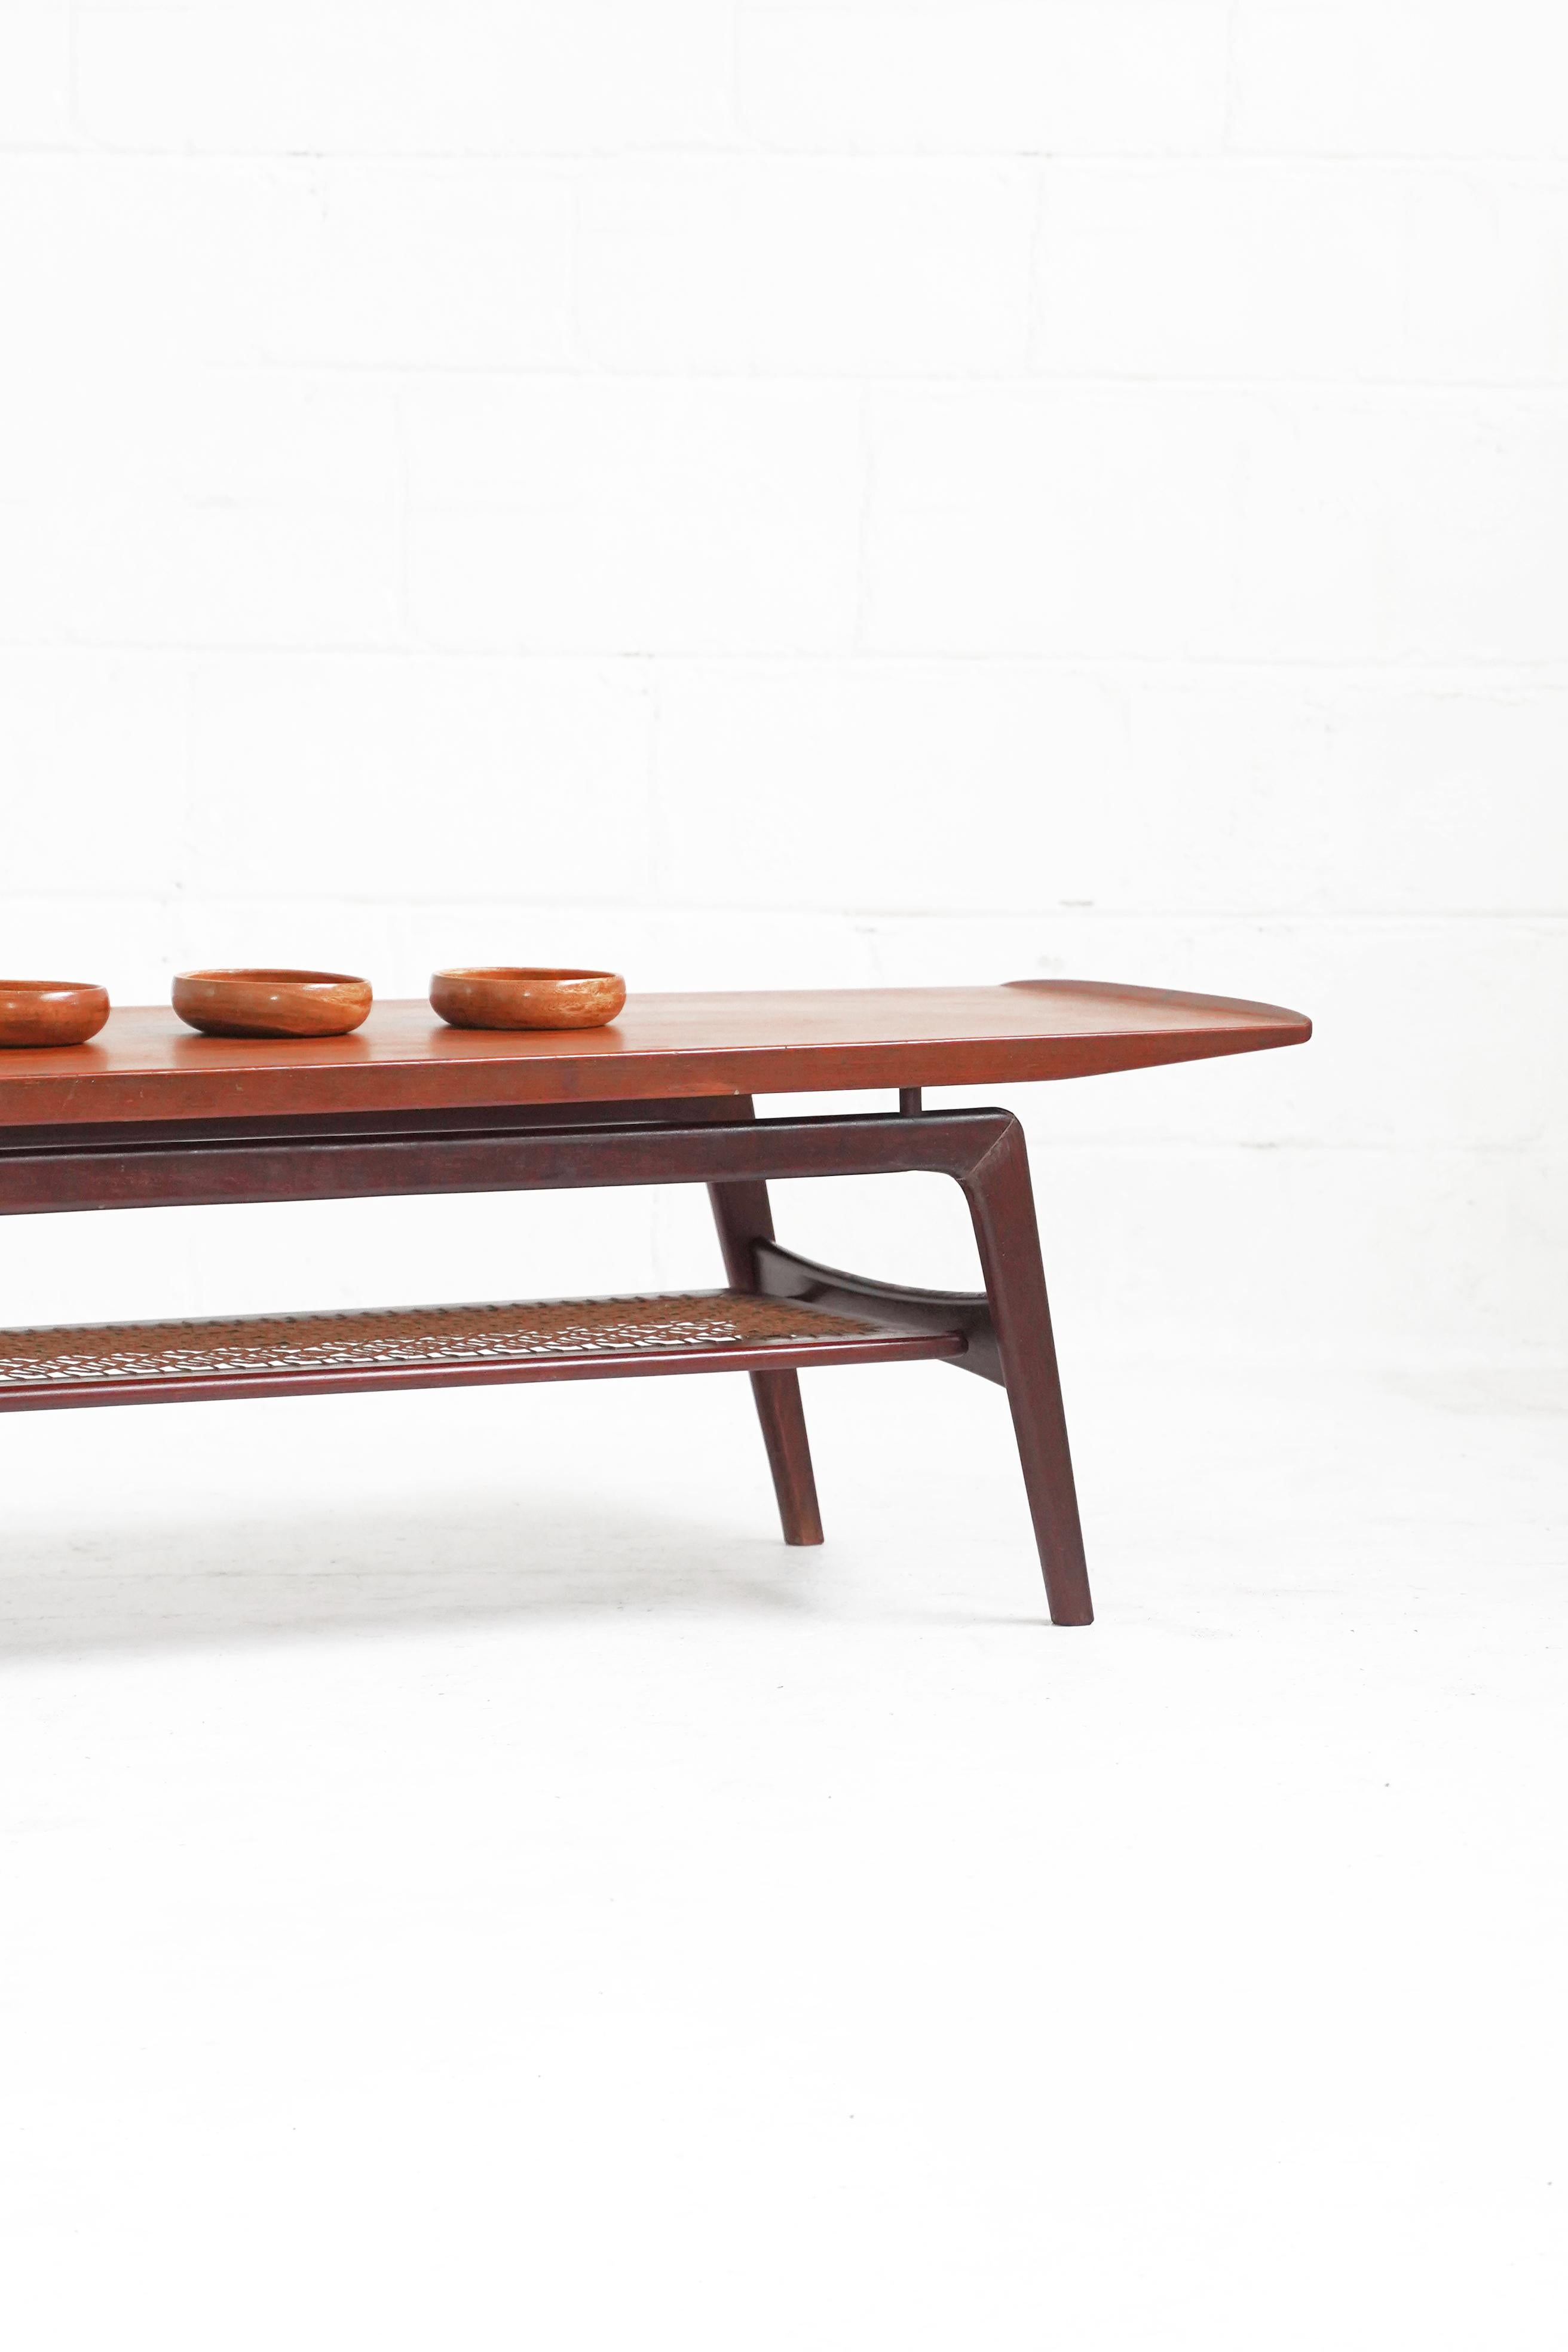 Stunning teak coffee table by Arne Hovmand-Olsen with lower corded shelf fully intact and evenly spaced. In overall good vintage condition with minor wear throughout. Repair done to leg, structurally sound - shown in photos.